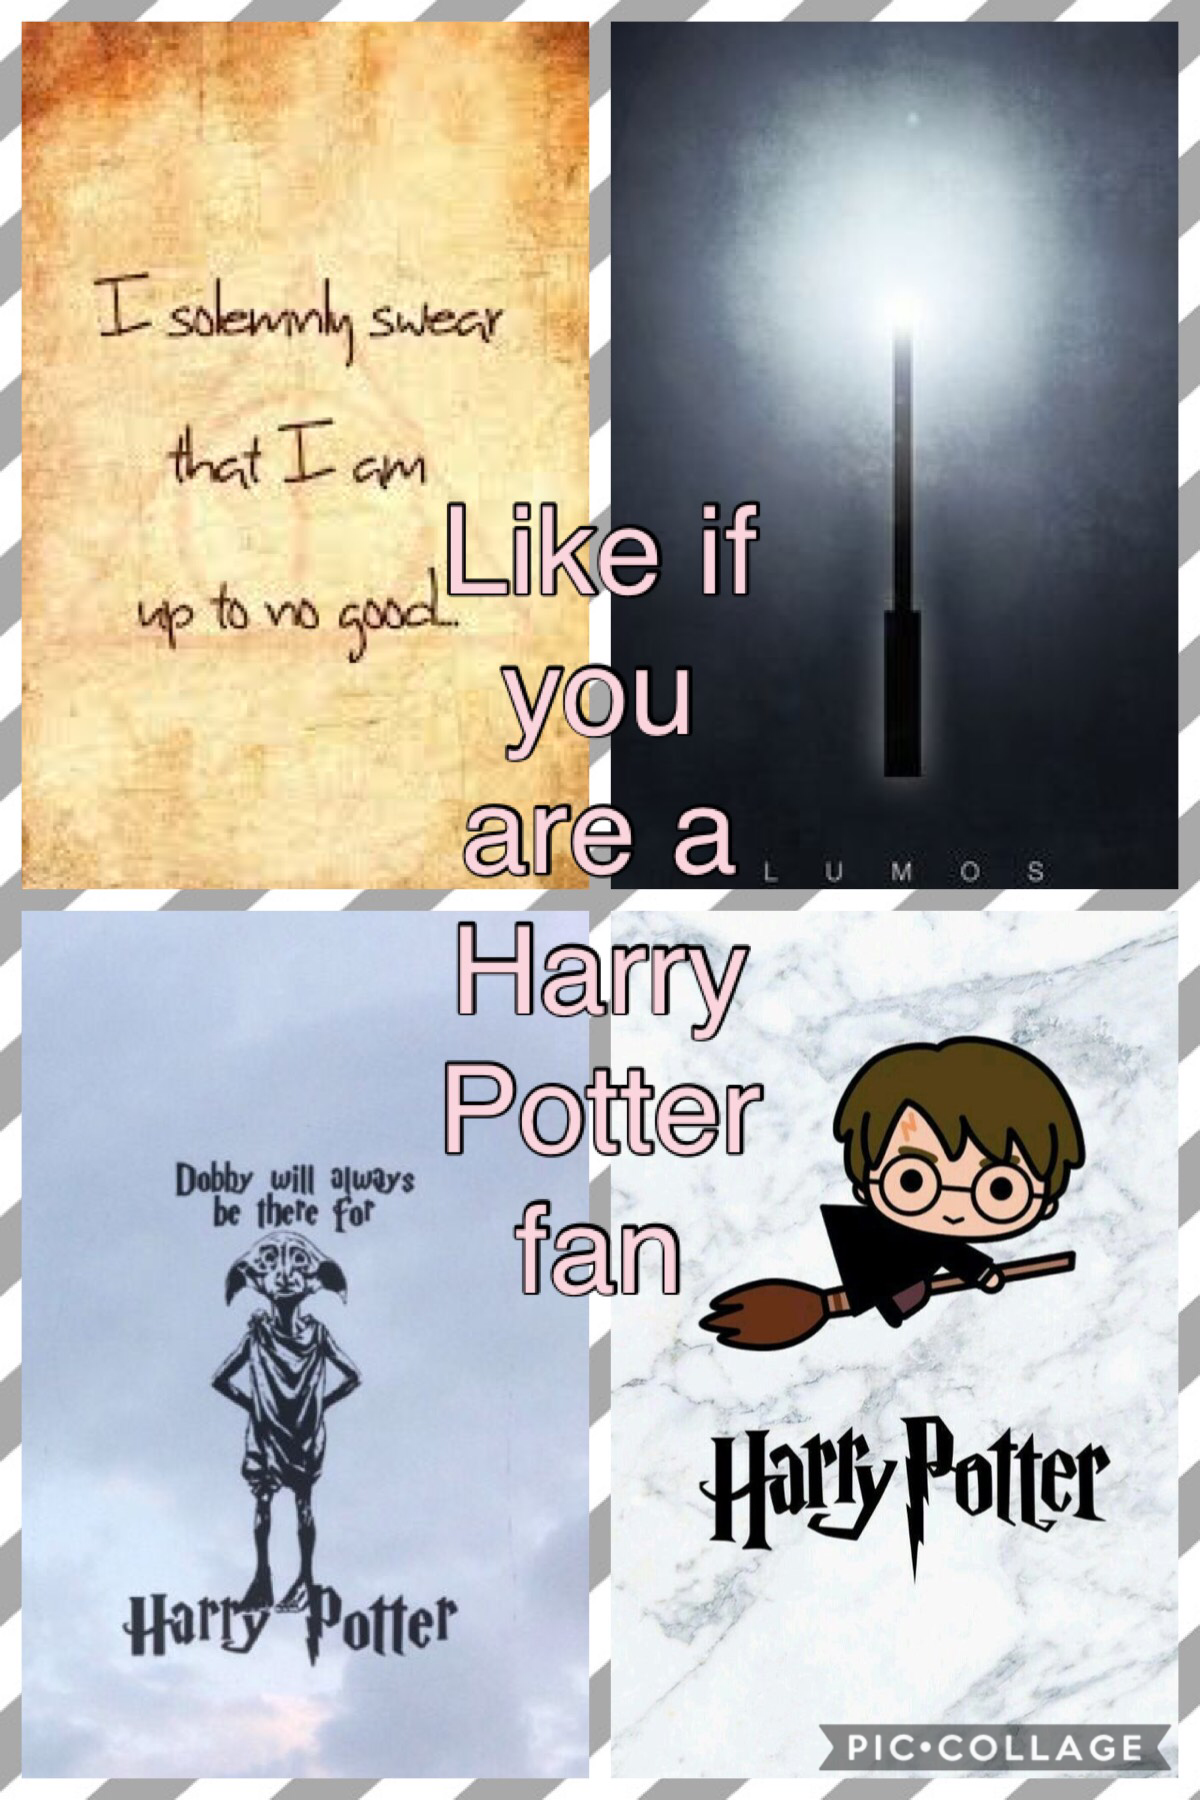 Like if you are a Harry Potter fab